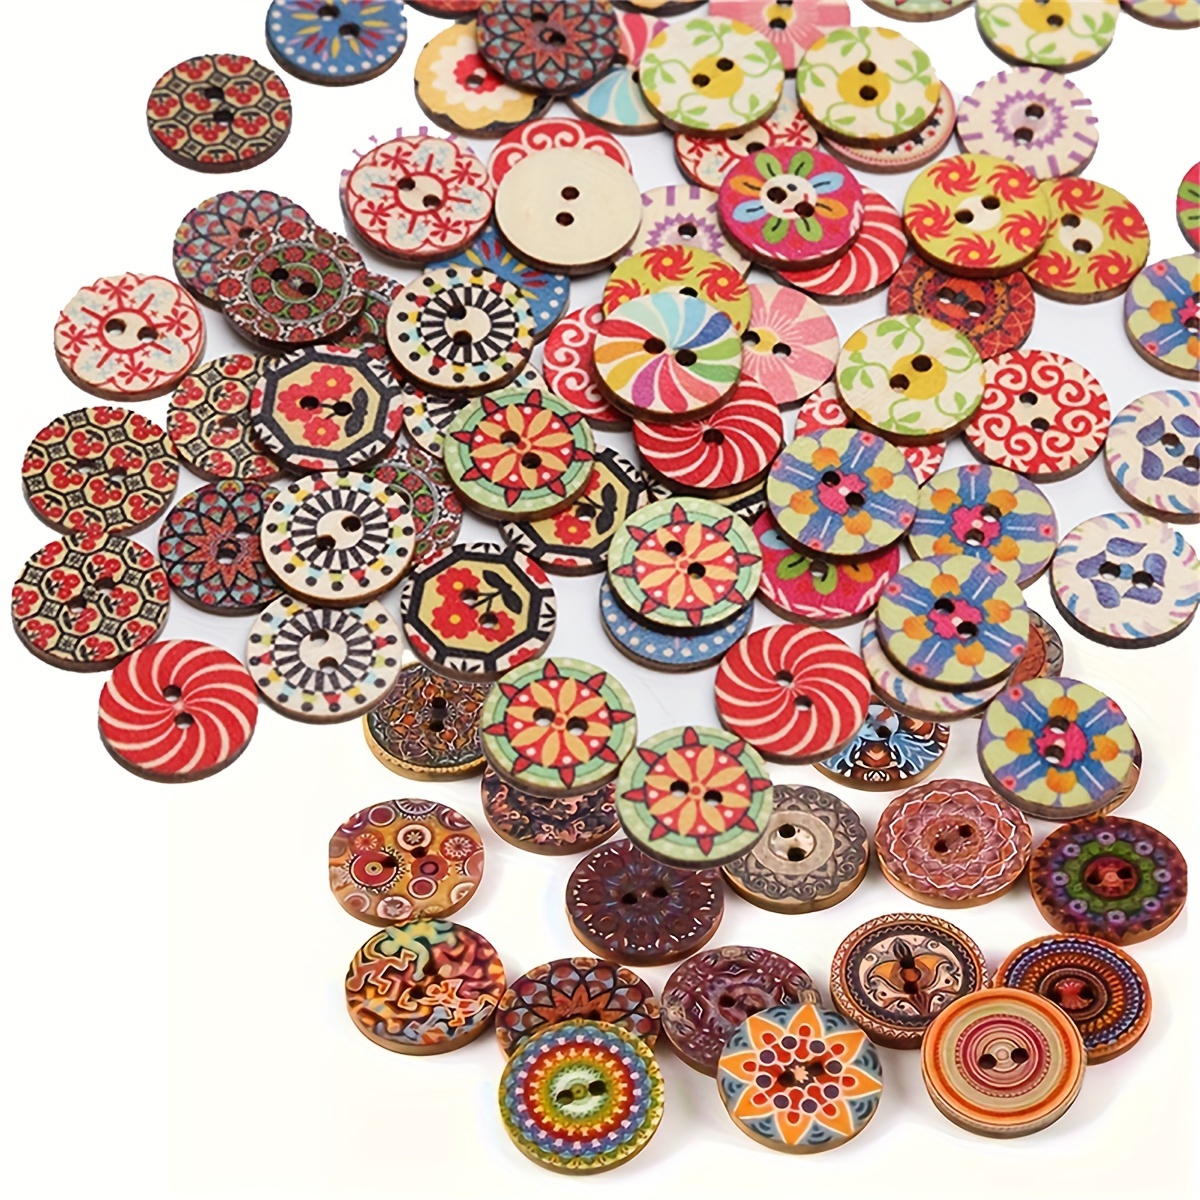  200Pcs Wood Buttons for Crafts, 20mm Vintage Buttons Mixed  Pattern Wooden Buttons Round Flower Buttons with 2 Holes for DIY Sewing  Craft Decorative : Arts, Crafts & Sewing